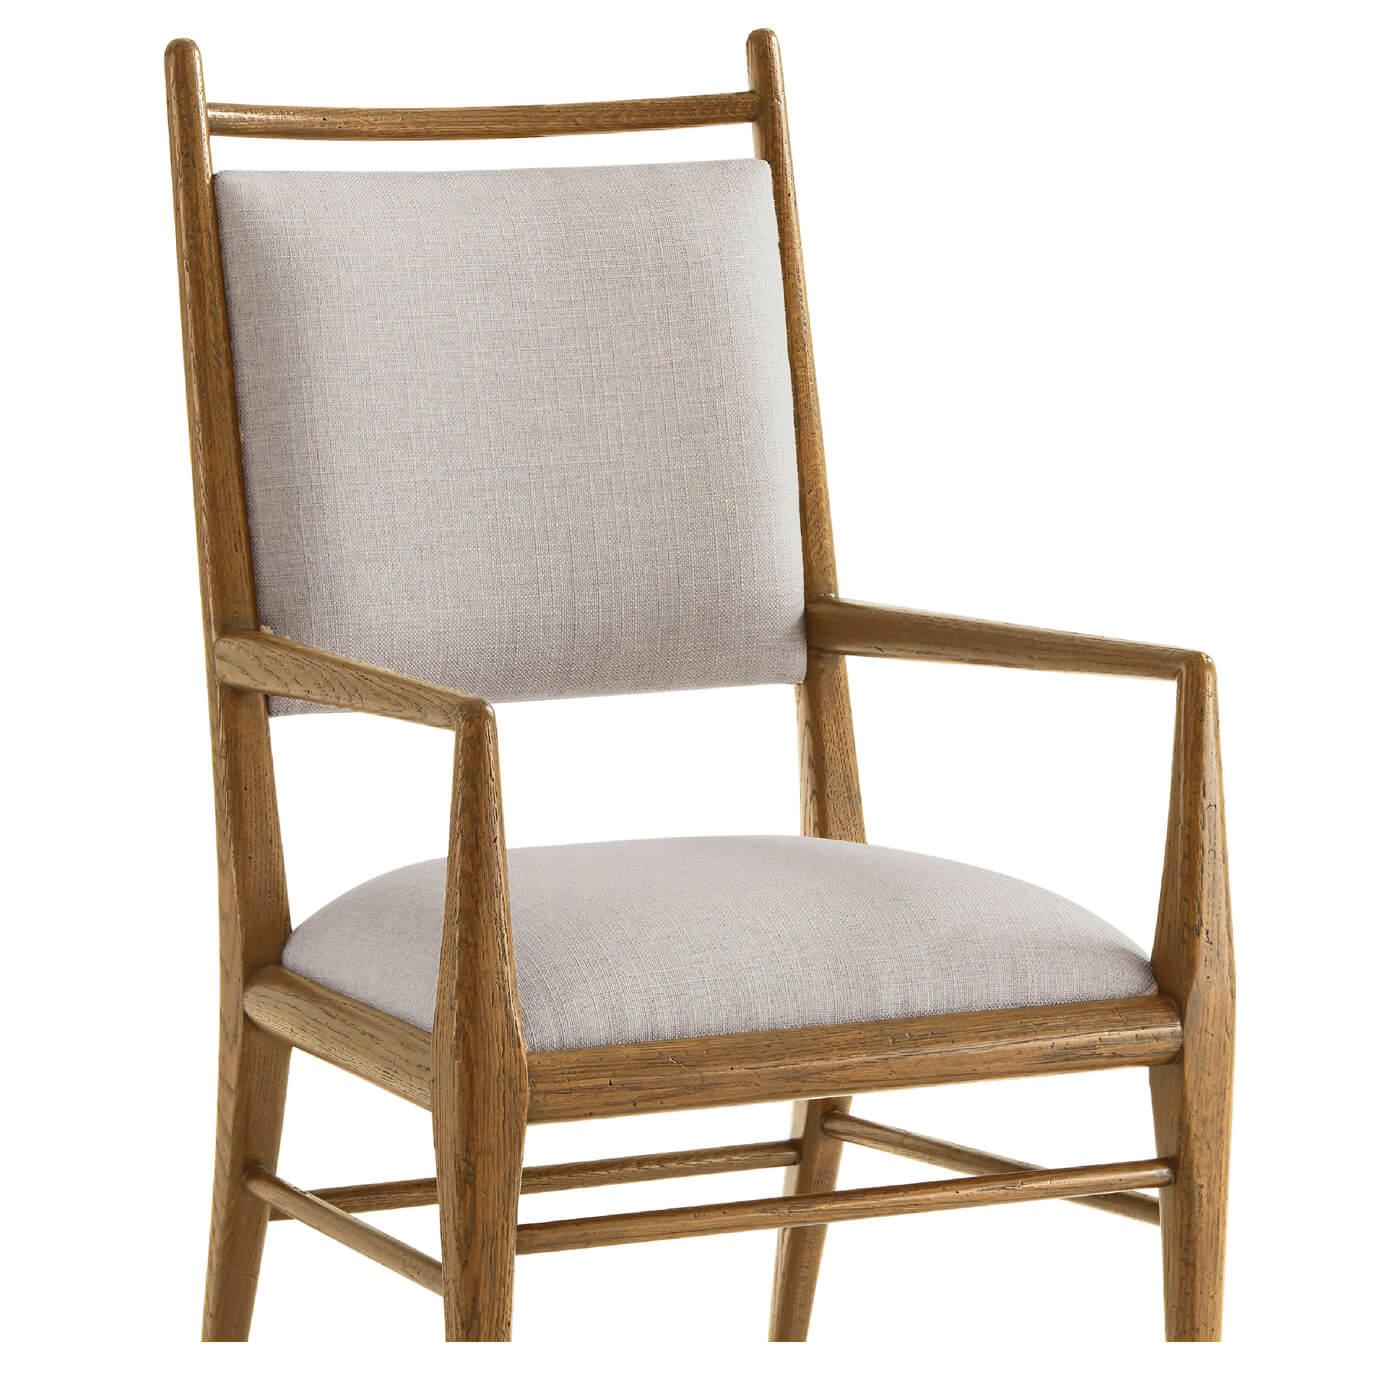 Mid Century style light oak dining armchair in our dawn finish, with a padded back and seat upholstered in performance linen fabric adds comfort and sophistication to this timeless design. Raised on tapered legs joined by a supportive